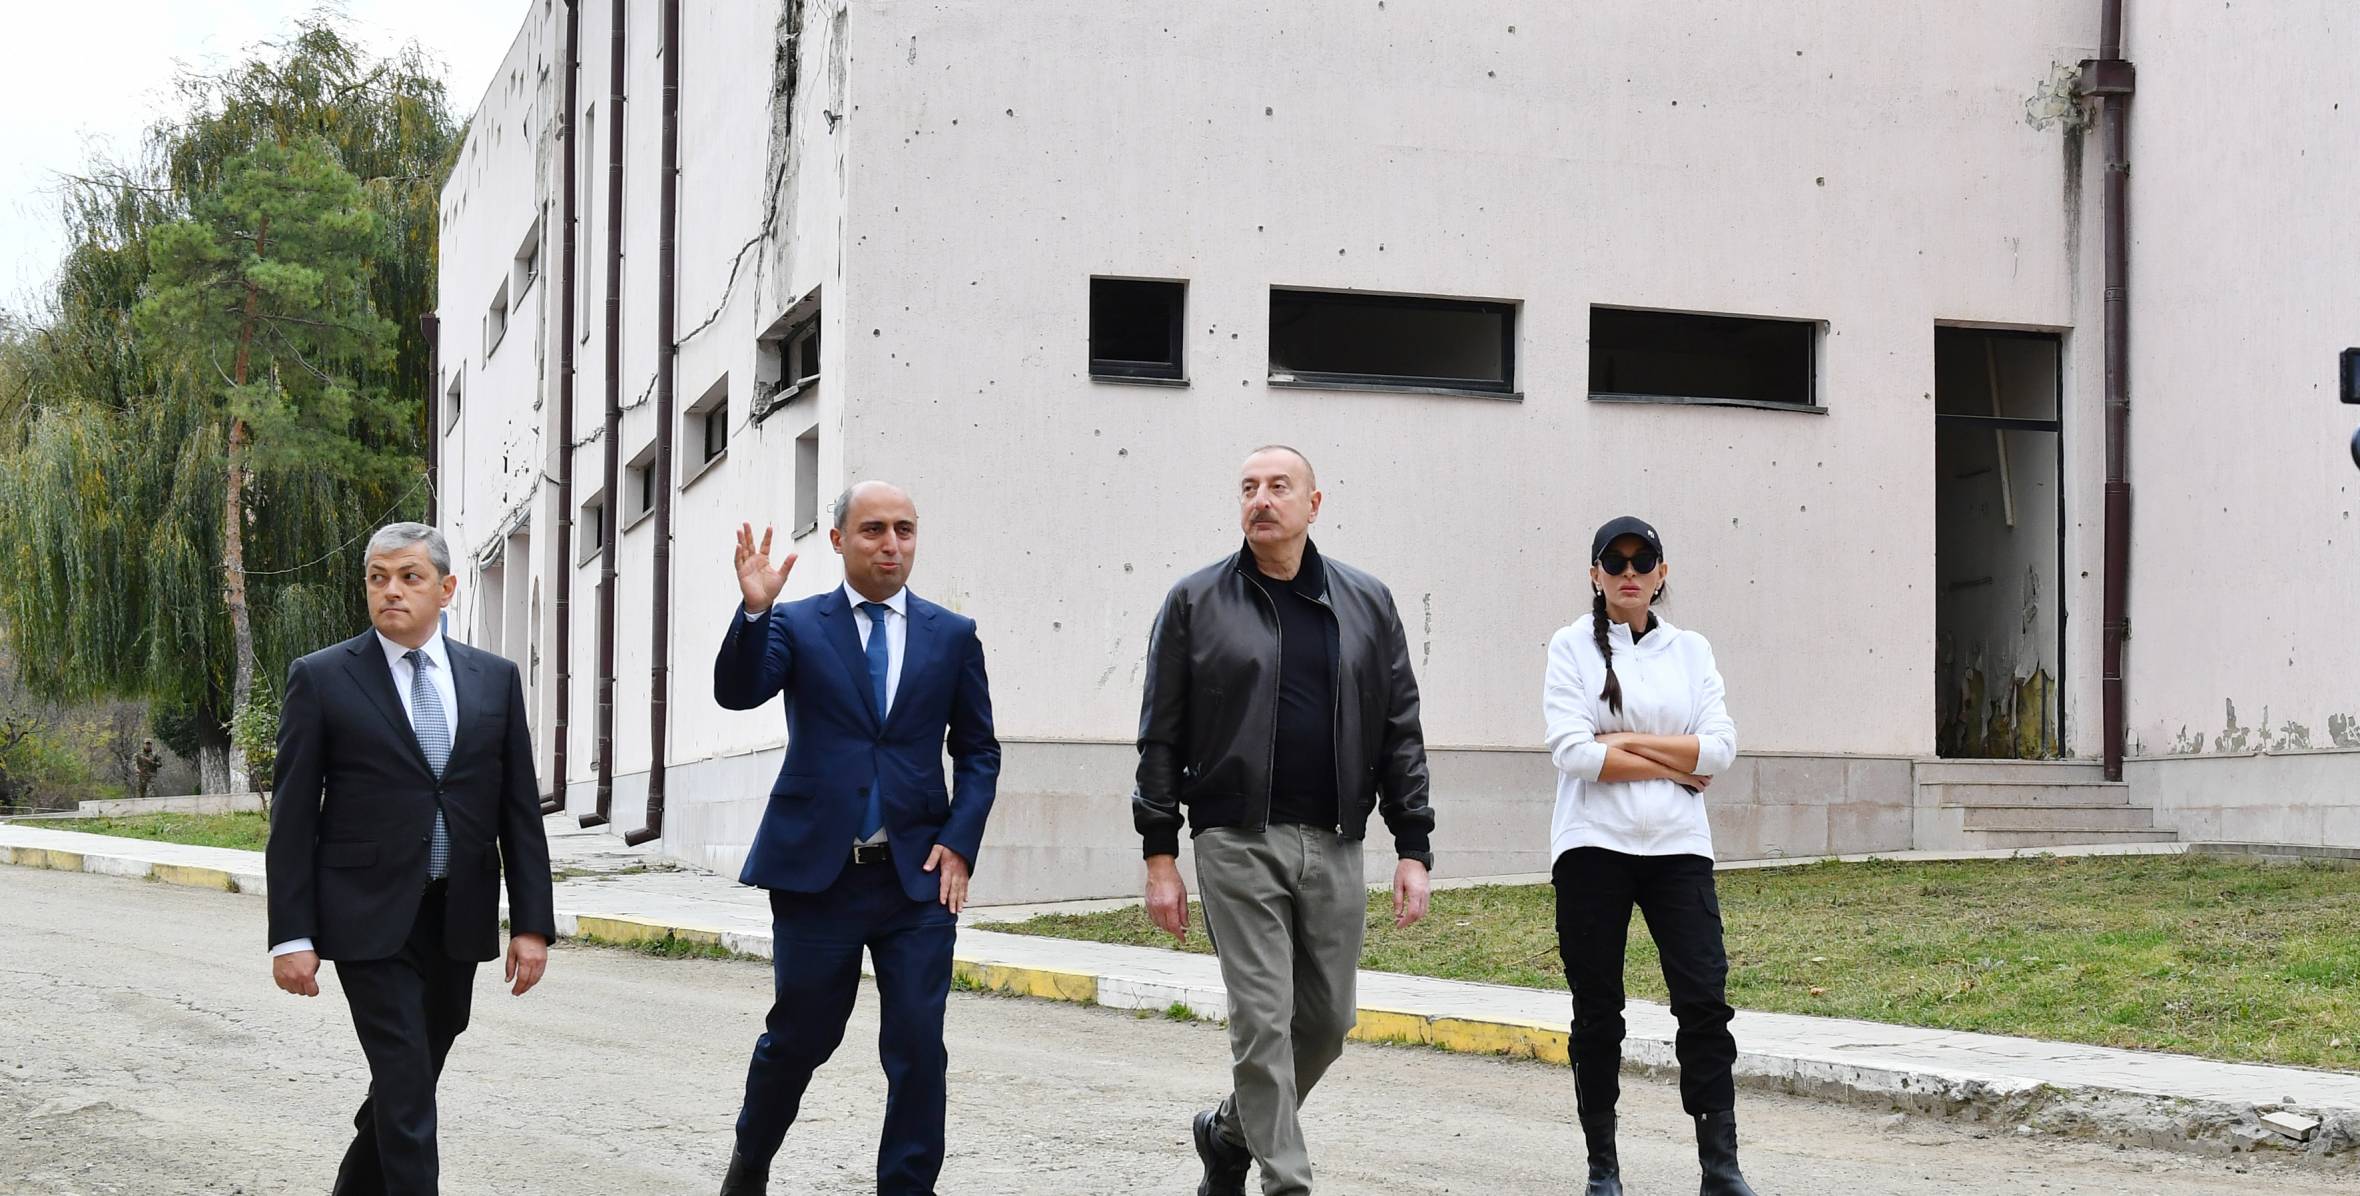 Ilham Aliyev viewed buildings of vocational school and college in city of Shusha